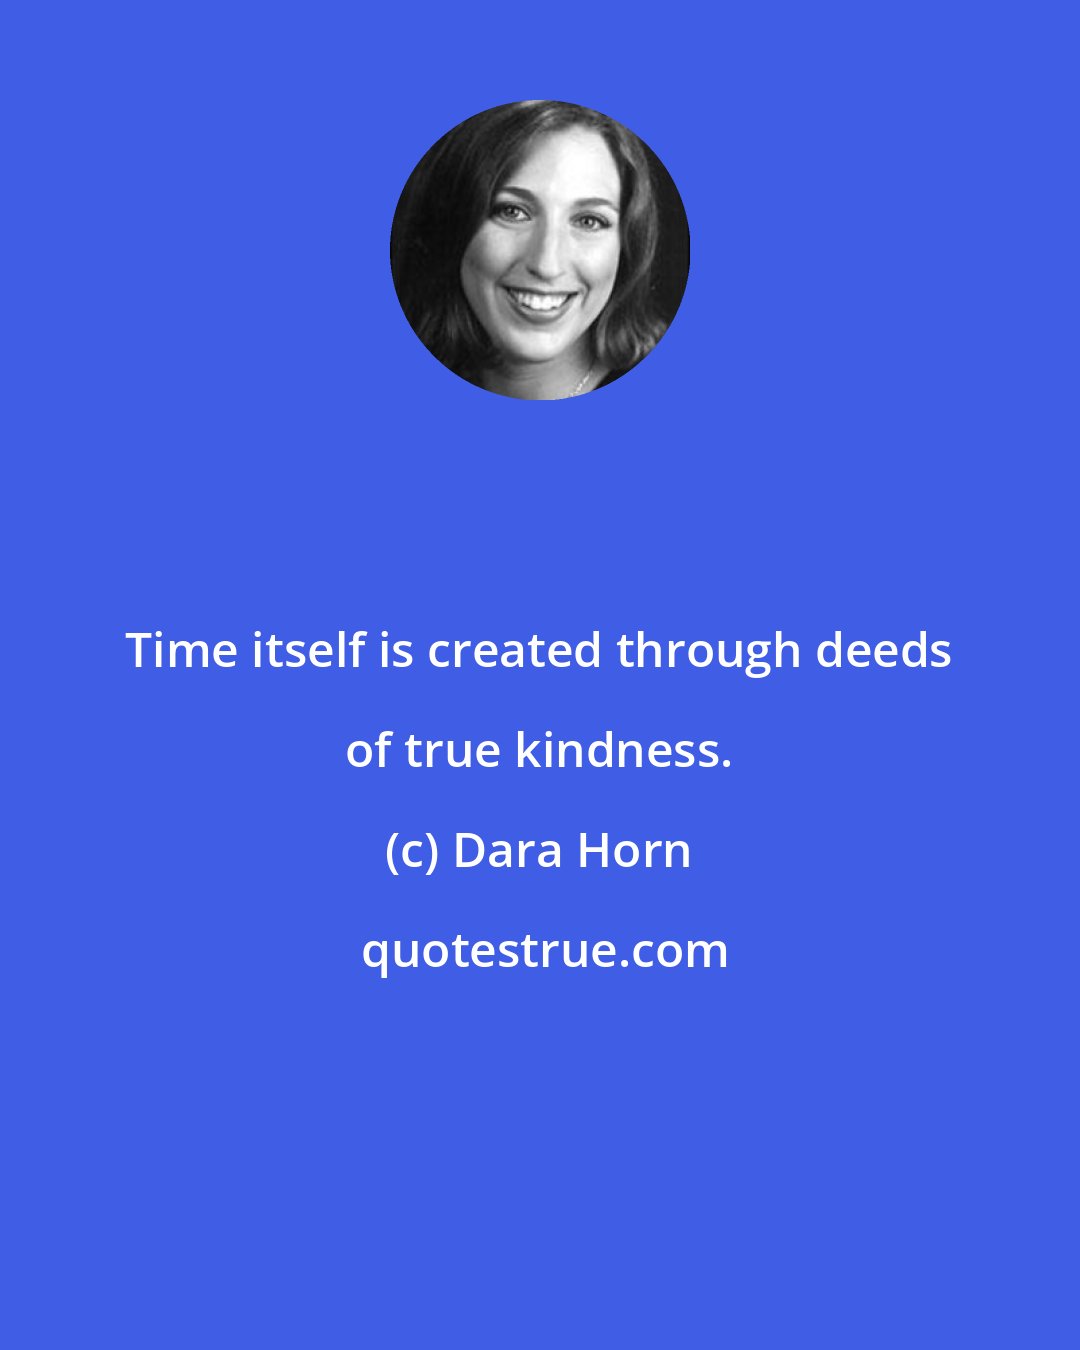 Dara Horn: Time itself is created through deeds of true kindness.